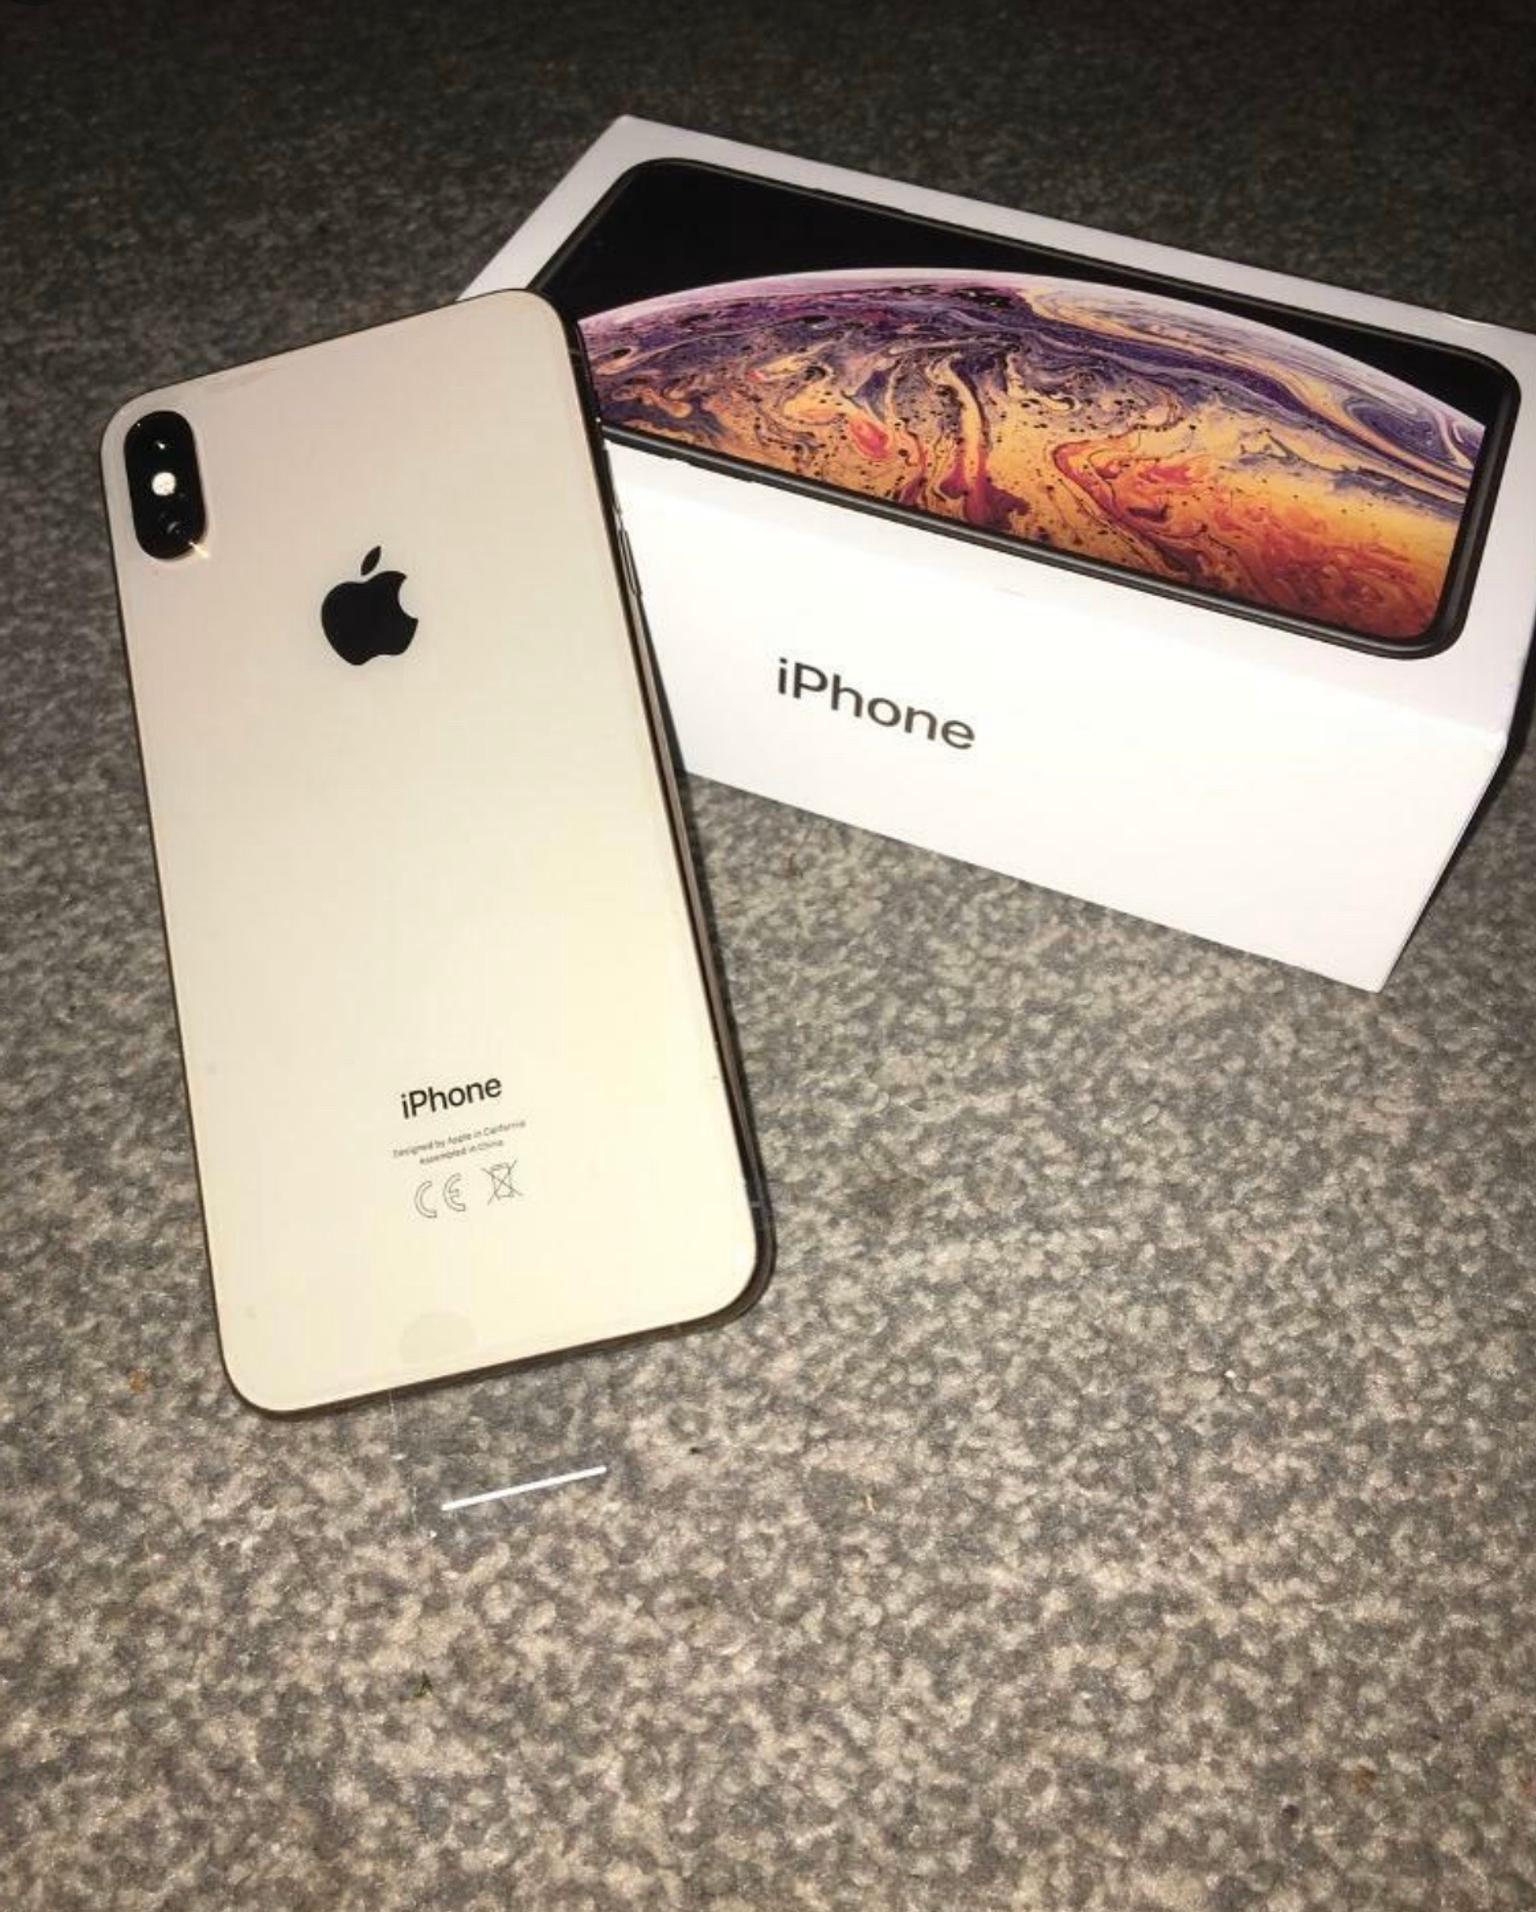 IPHONE XS MAX ROSE GOLD in 77021 Houston for US500.00 for